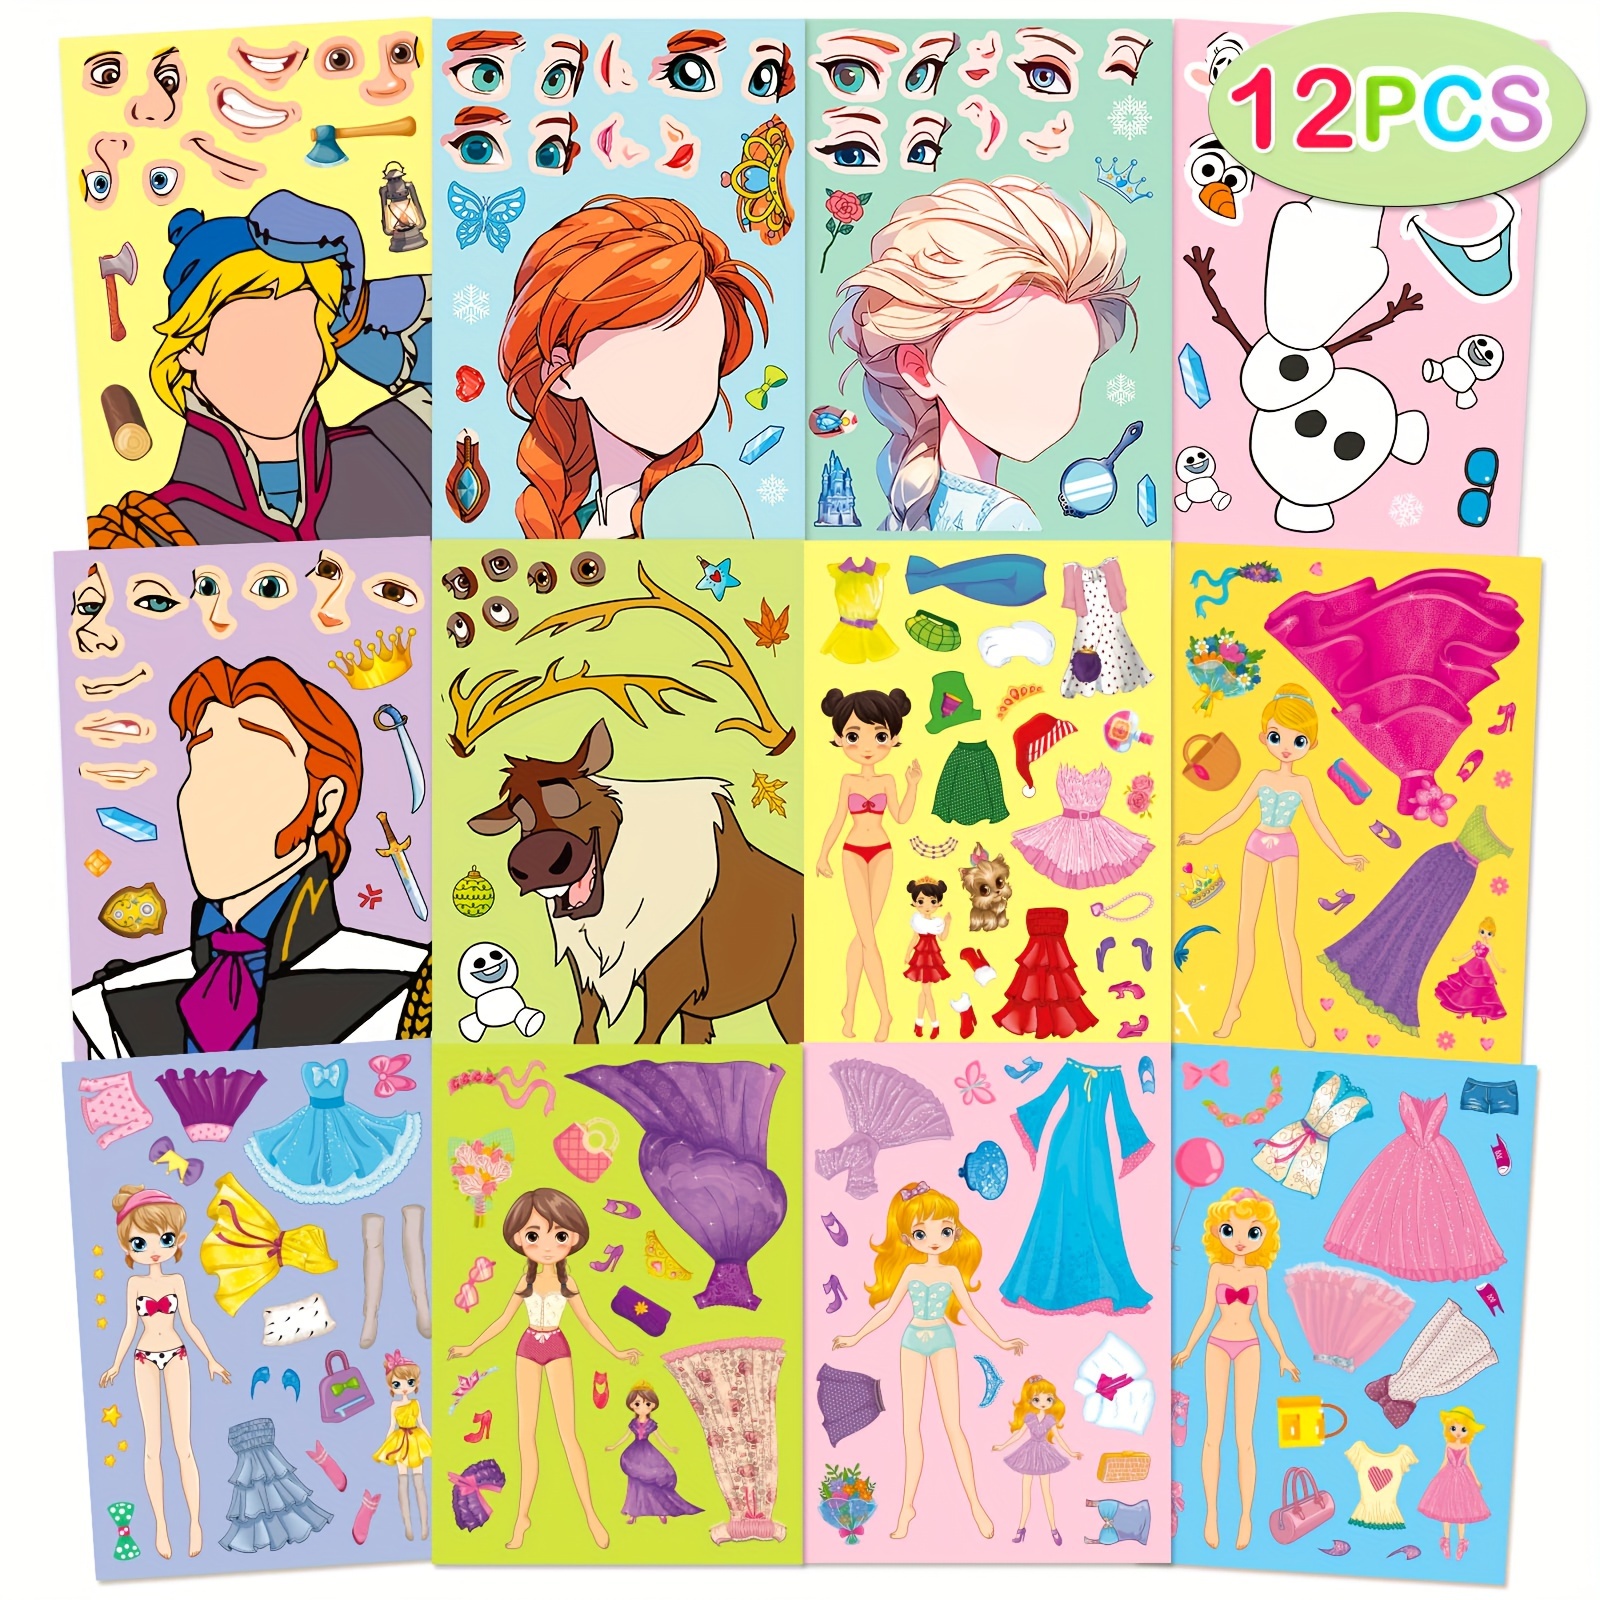 12 Sheets No-repeat Face Stickers, Cartoon Princess Exquisite * Stickers For Party Favors Activities, Cartoon Stickers For Teens And Adults, DIY Make A Face Stickers Mixed